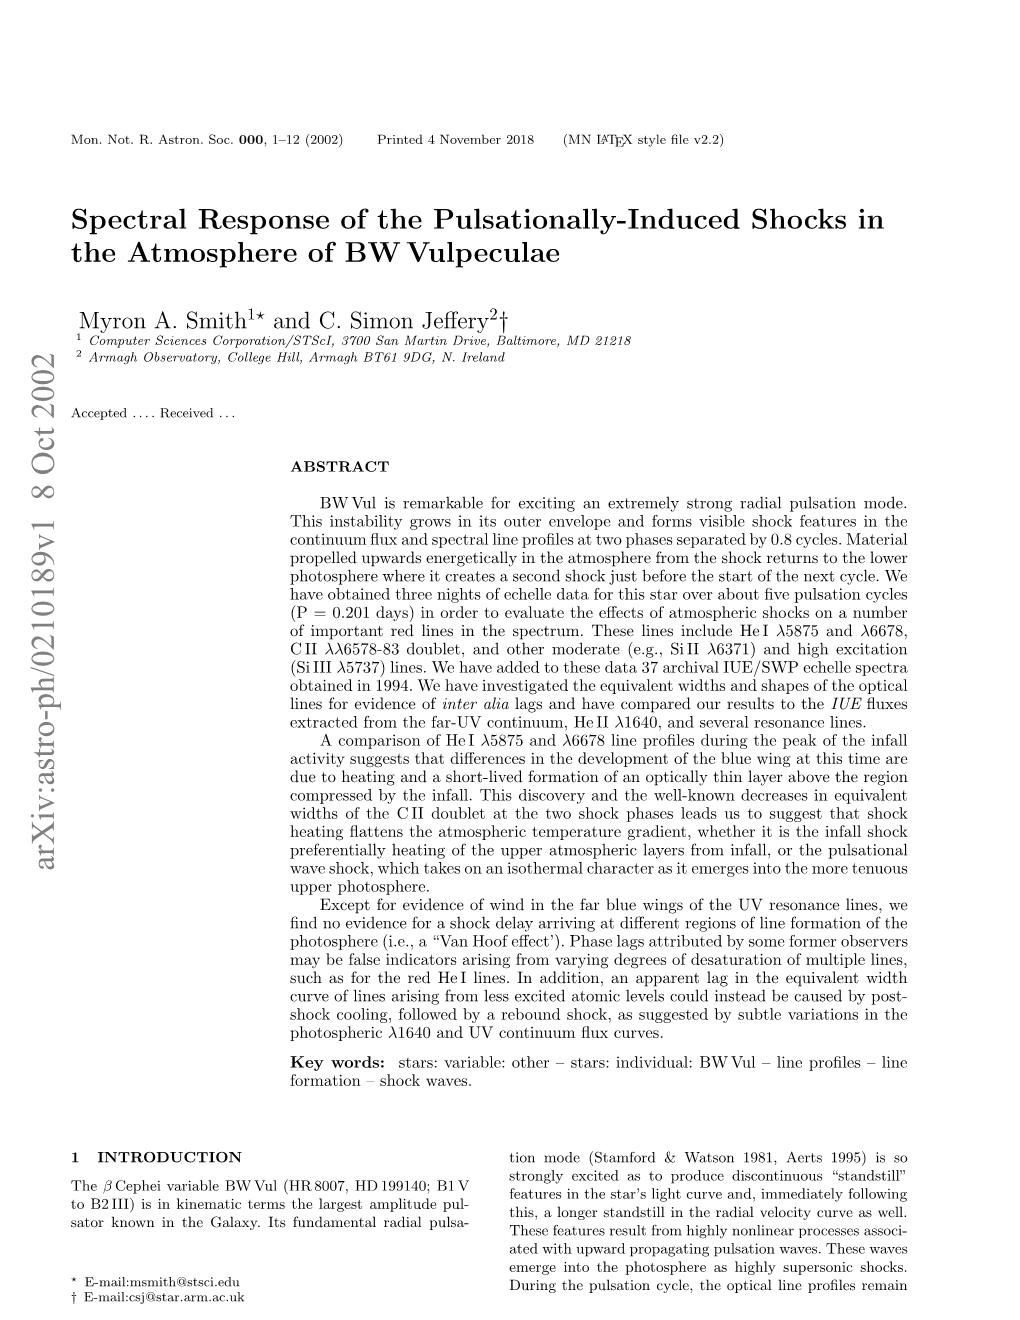 Spectral Response of the Pulsationally-Induced Shocks in The